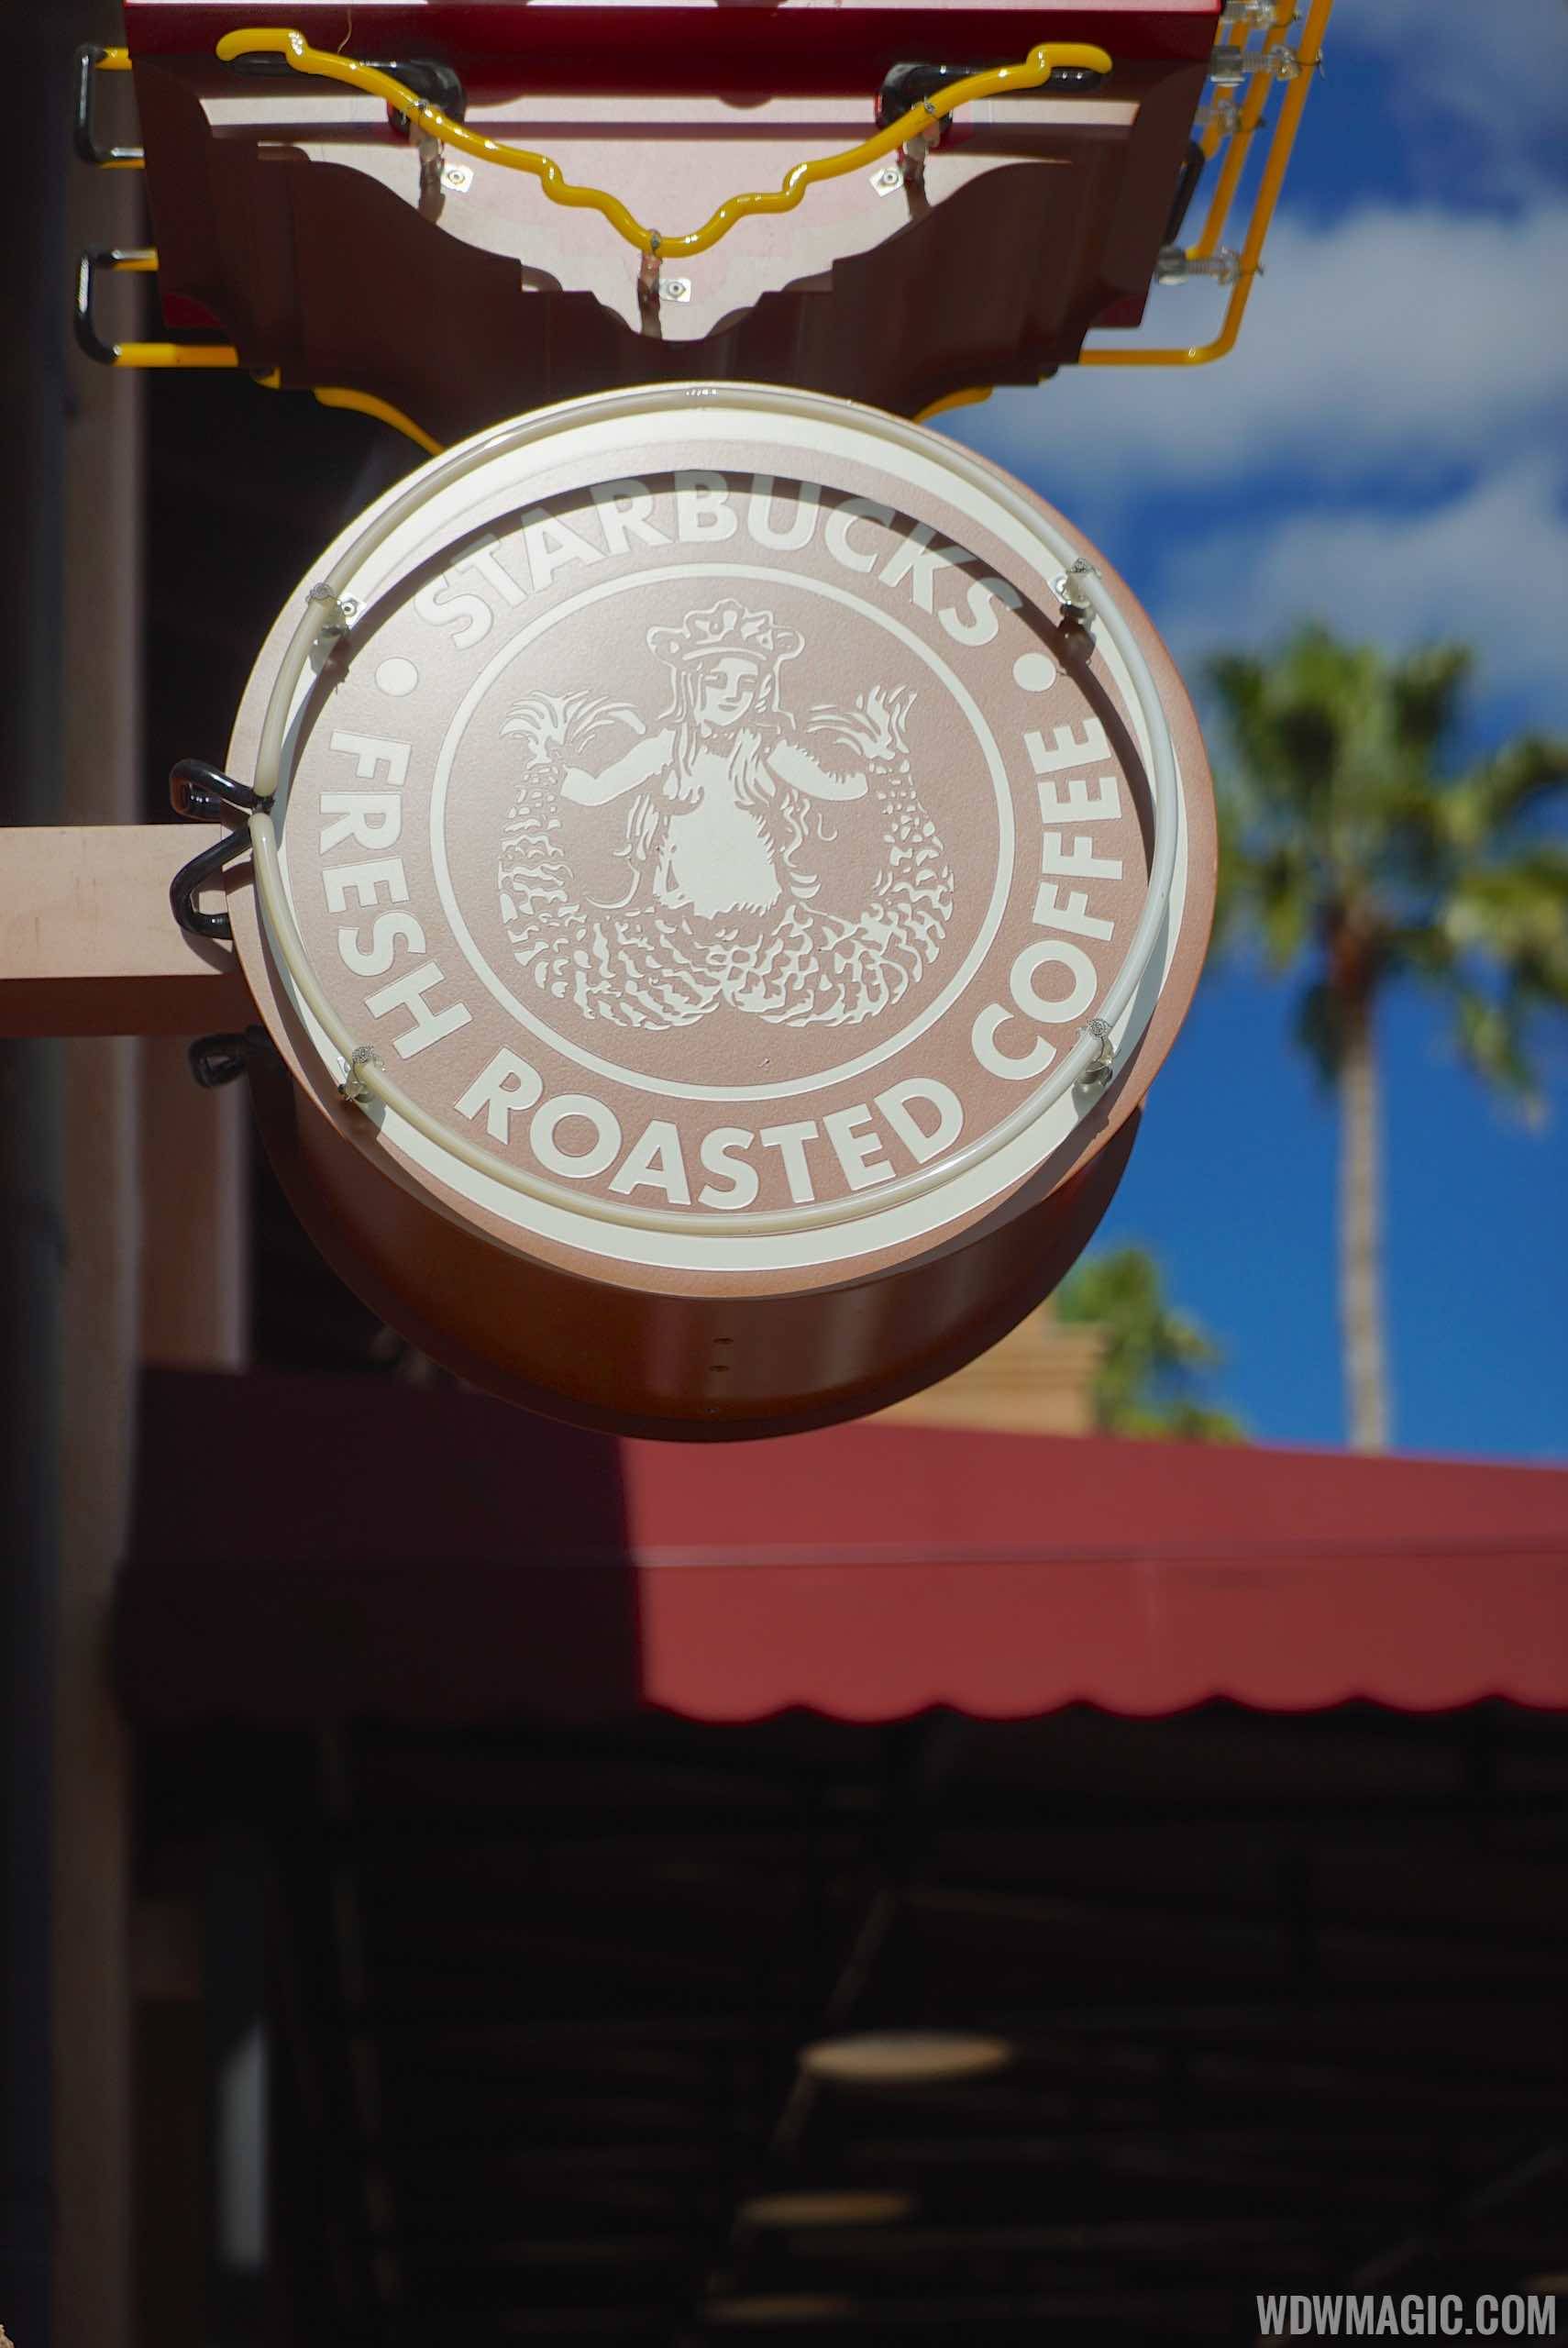 Starbucks at Disney's Hollywood Studios to be named The Trolley Car Café